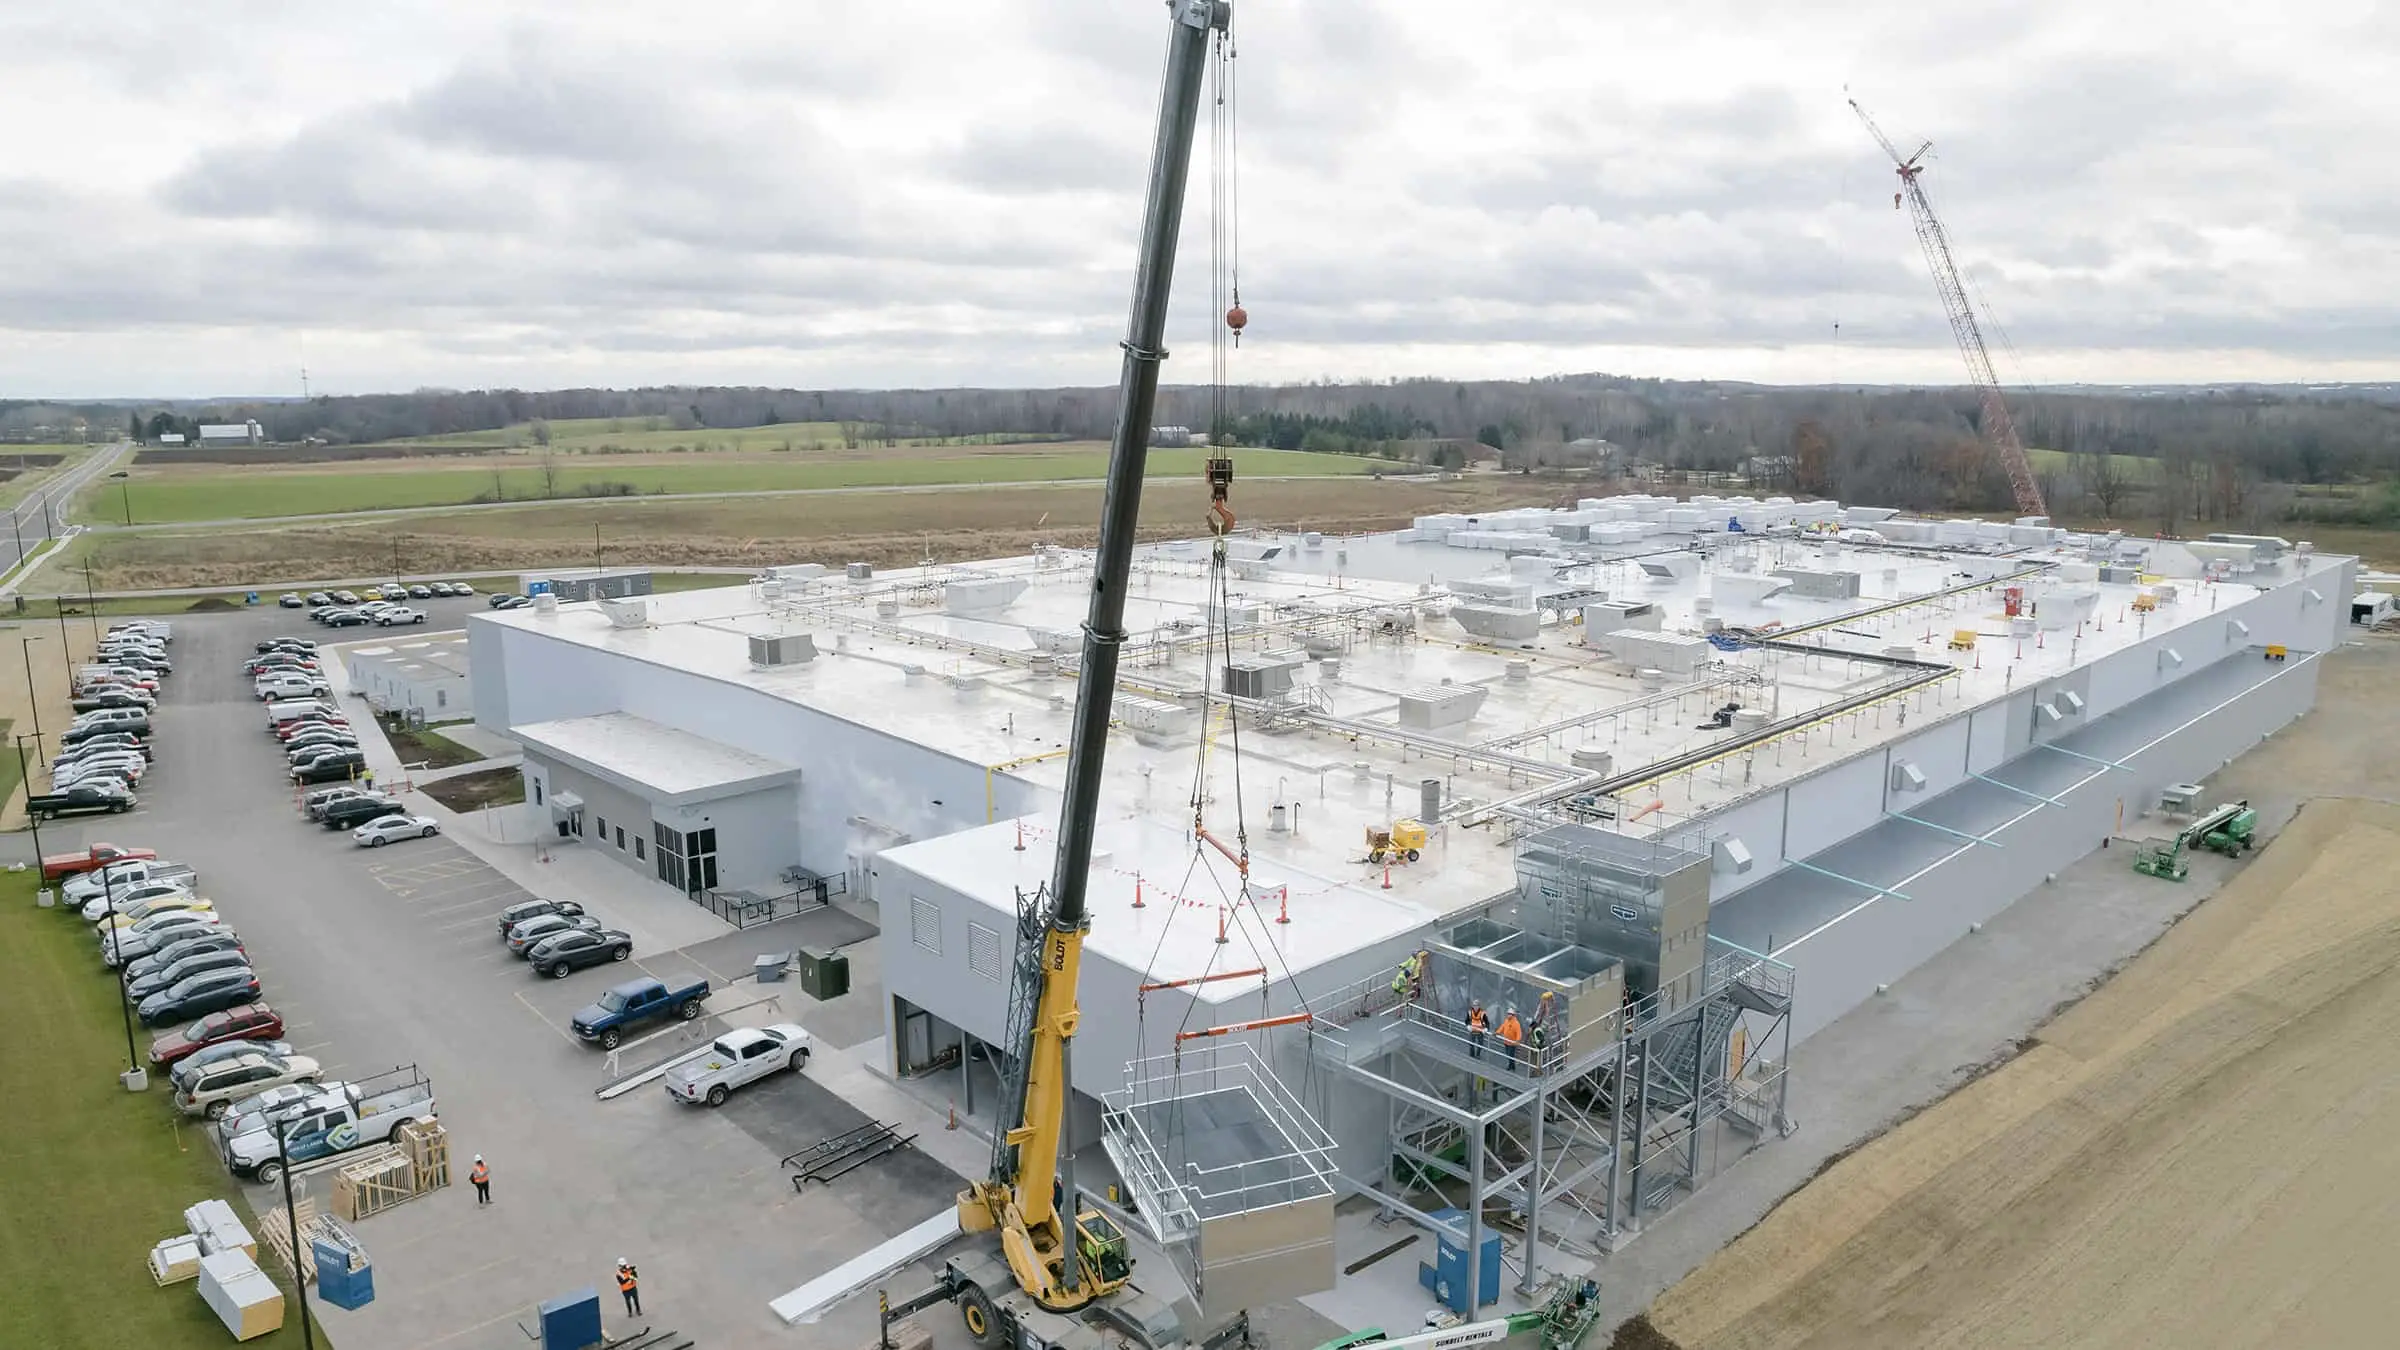 Salm Partners Meat Processing Plant - Aerial View as Construction Crane Lifts Equipment into Place